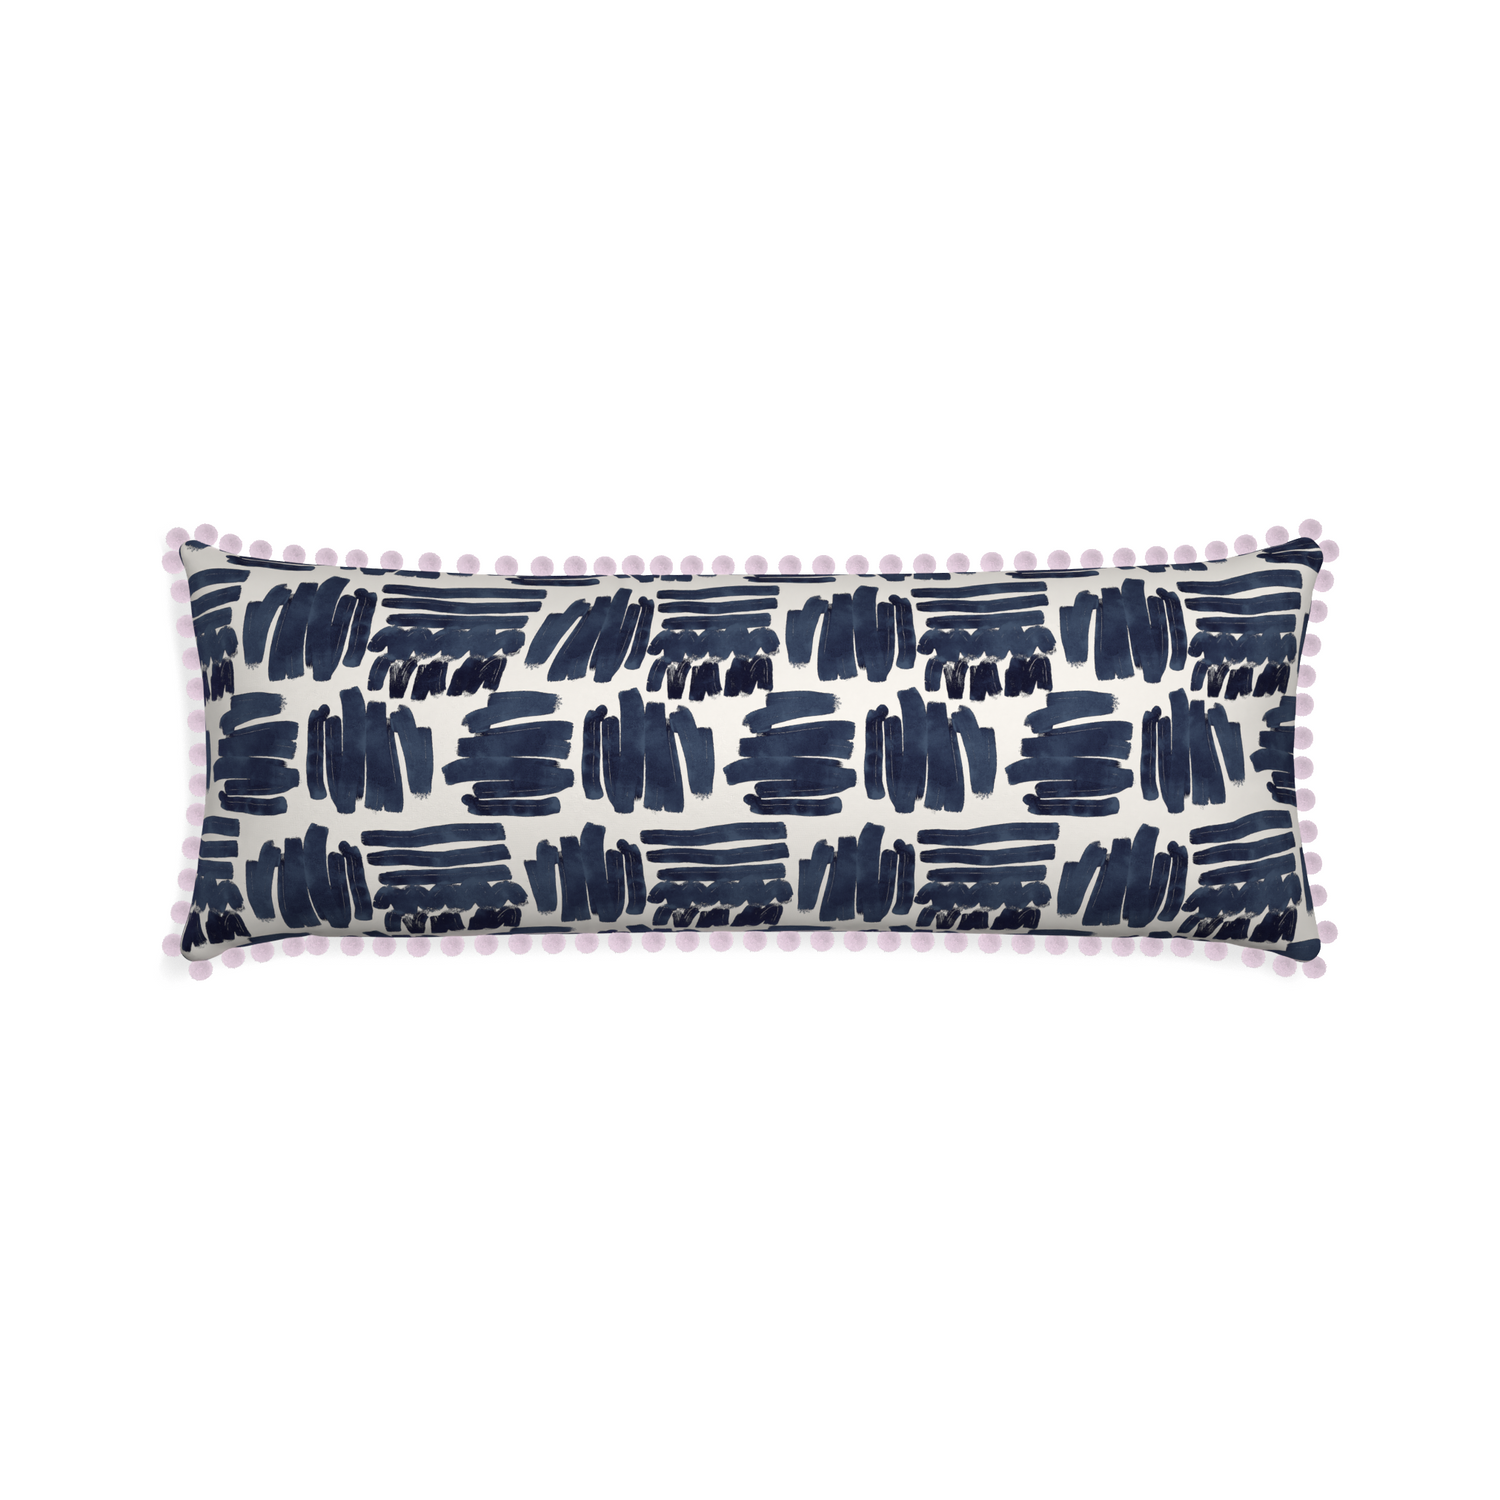 Xl-lumbar warby custom pillow with l on white background